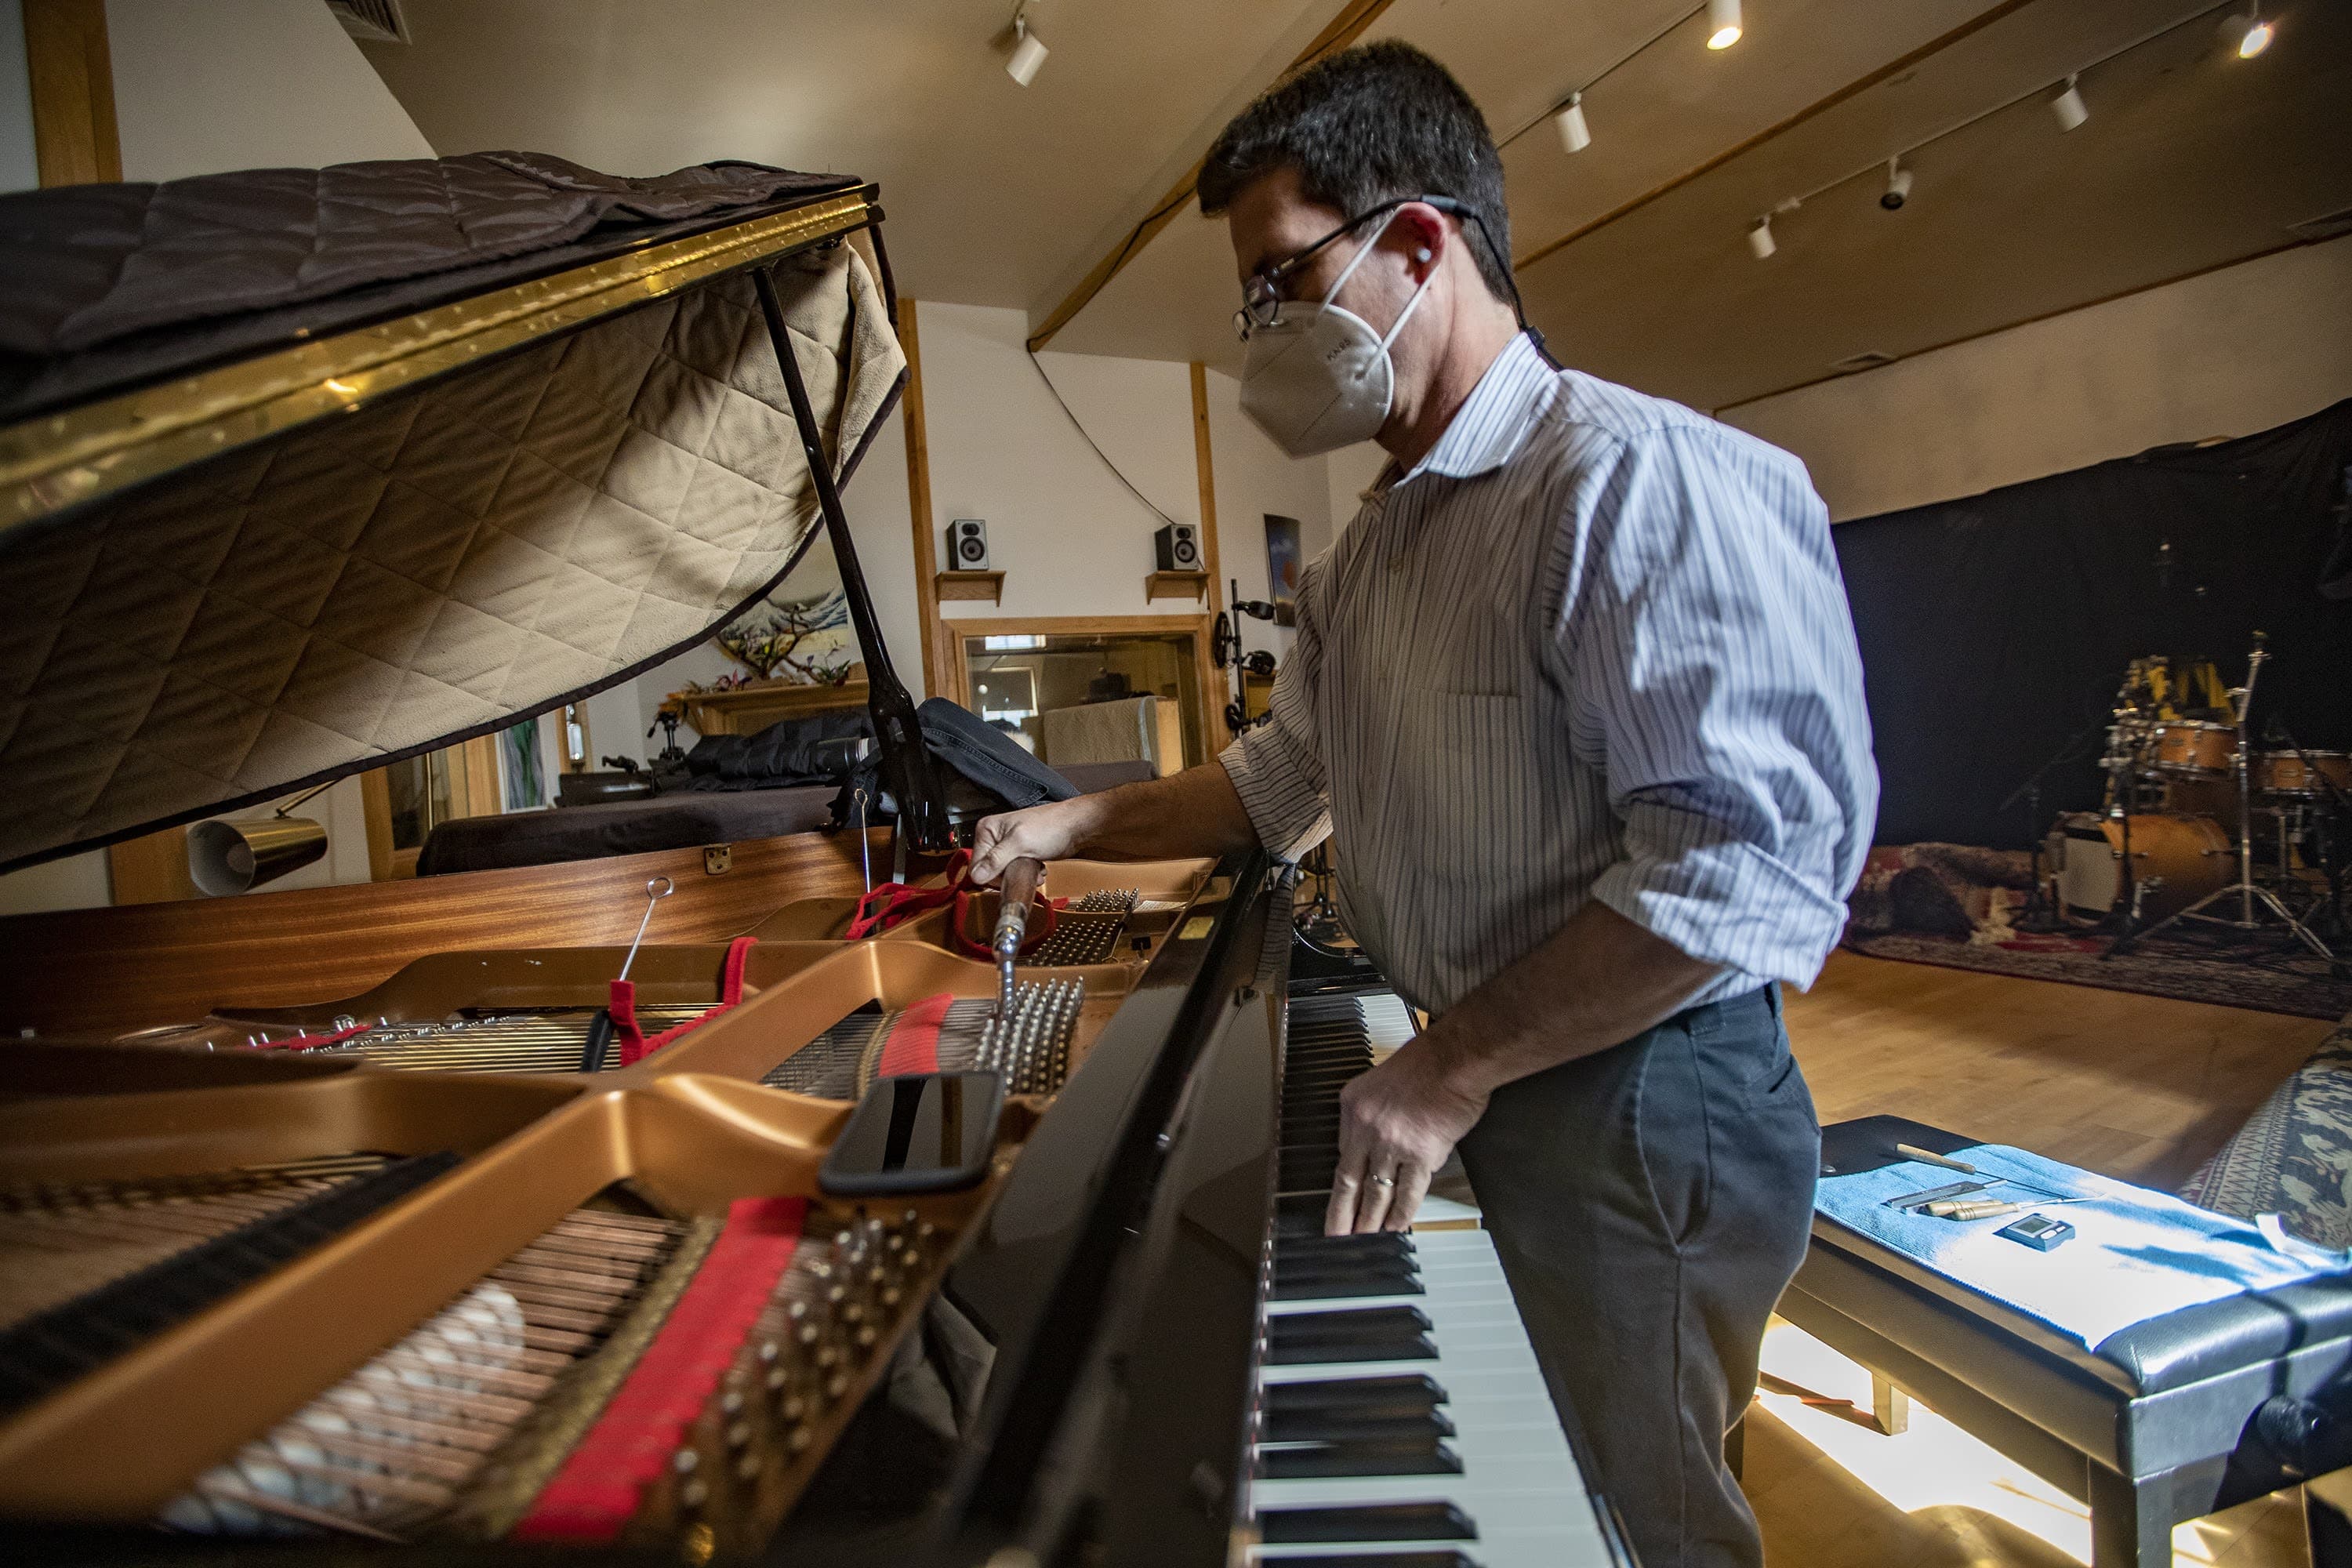 Nursery rhymes Liquefy sin How A Piano Tuner Is A Barometer For Boston's Battered Music Scene | WBUR  News